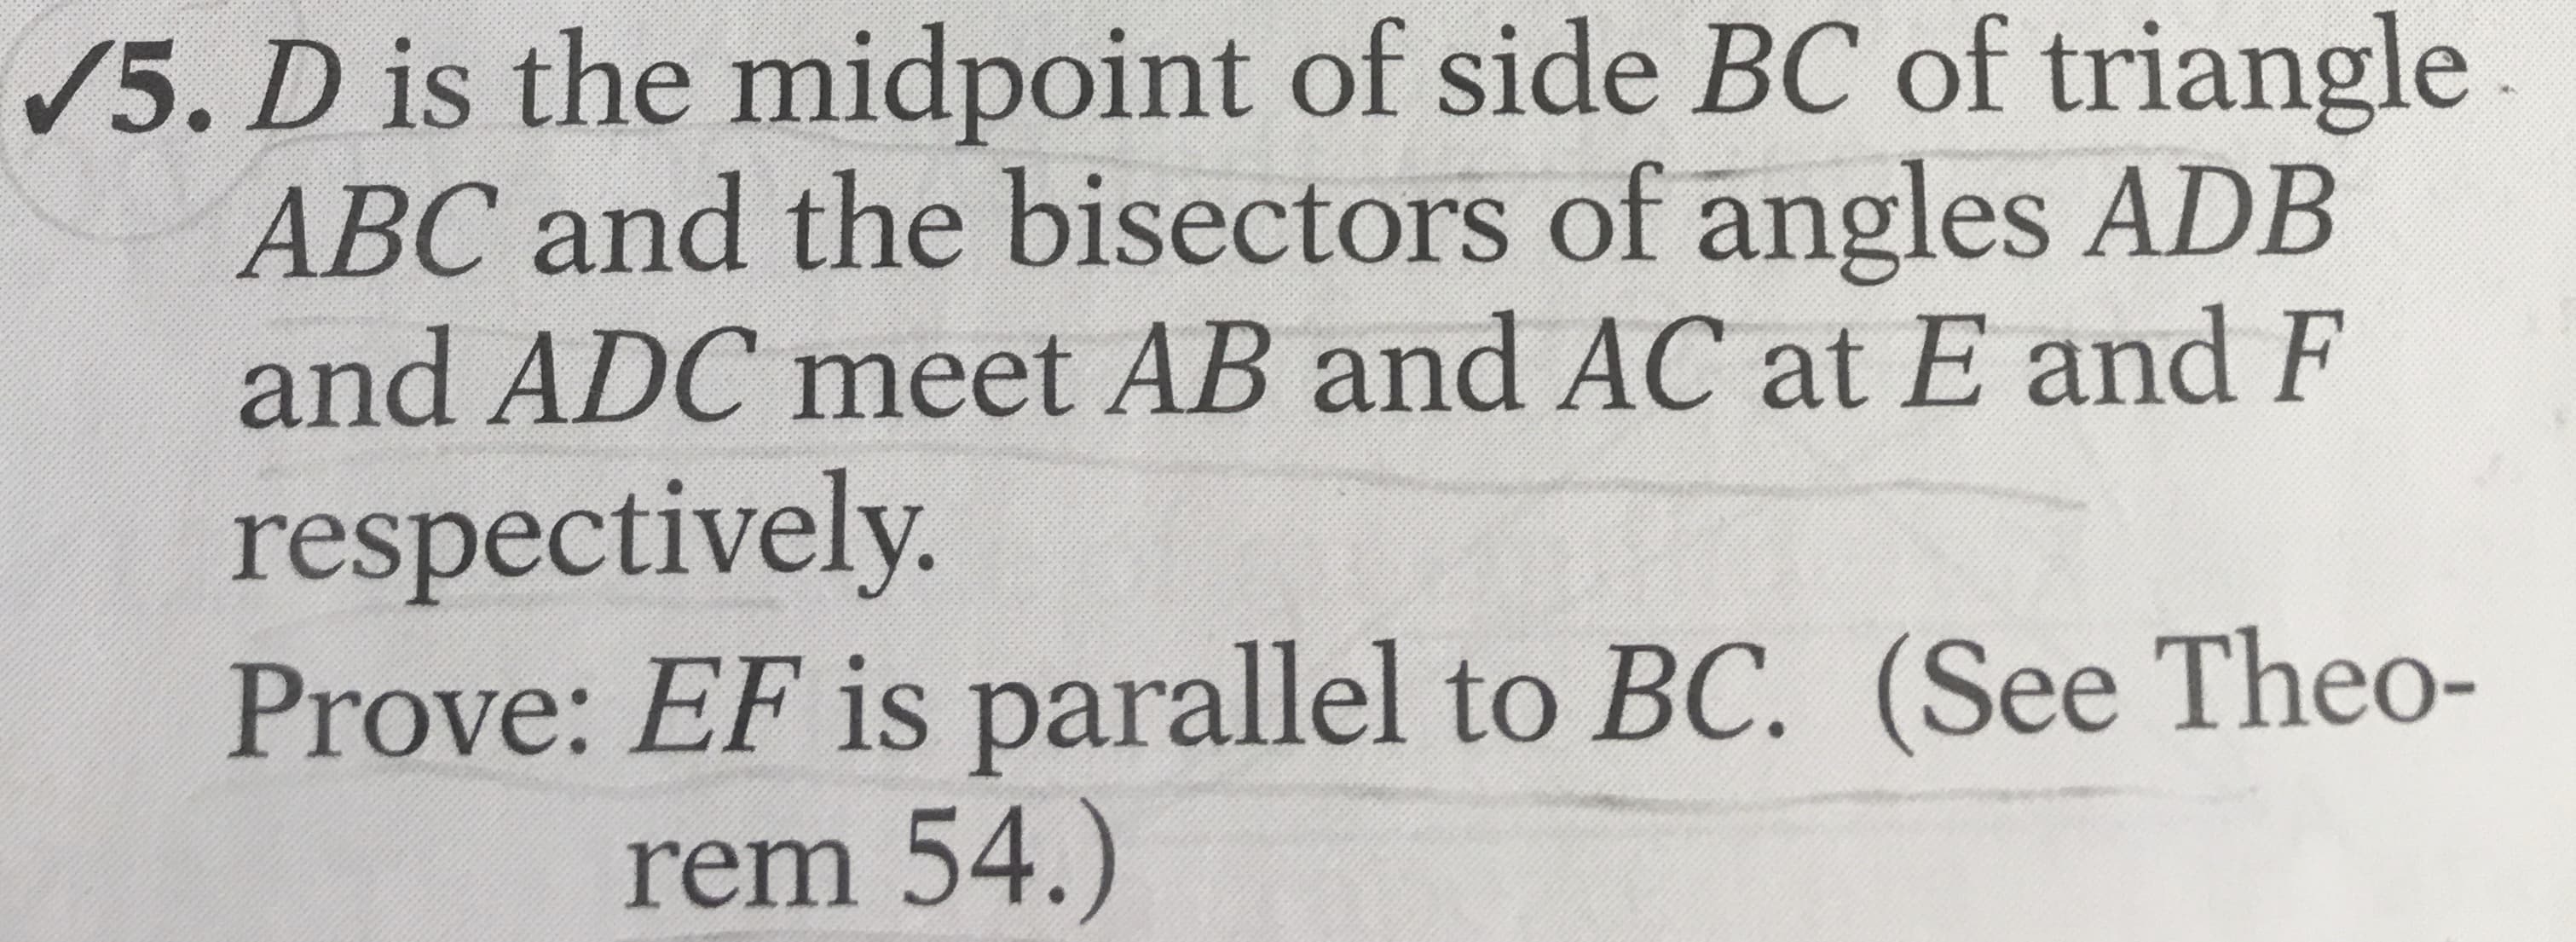 /5. D is the midpoint of side BC of triangle
ABC and the bisectors of angles ADB
and ADC meet AB and AC at E and F
respectively.
Prove: EF is parallel to BC. (See Theo-
rem 54.)
